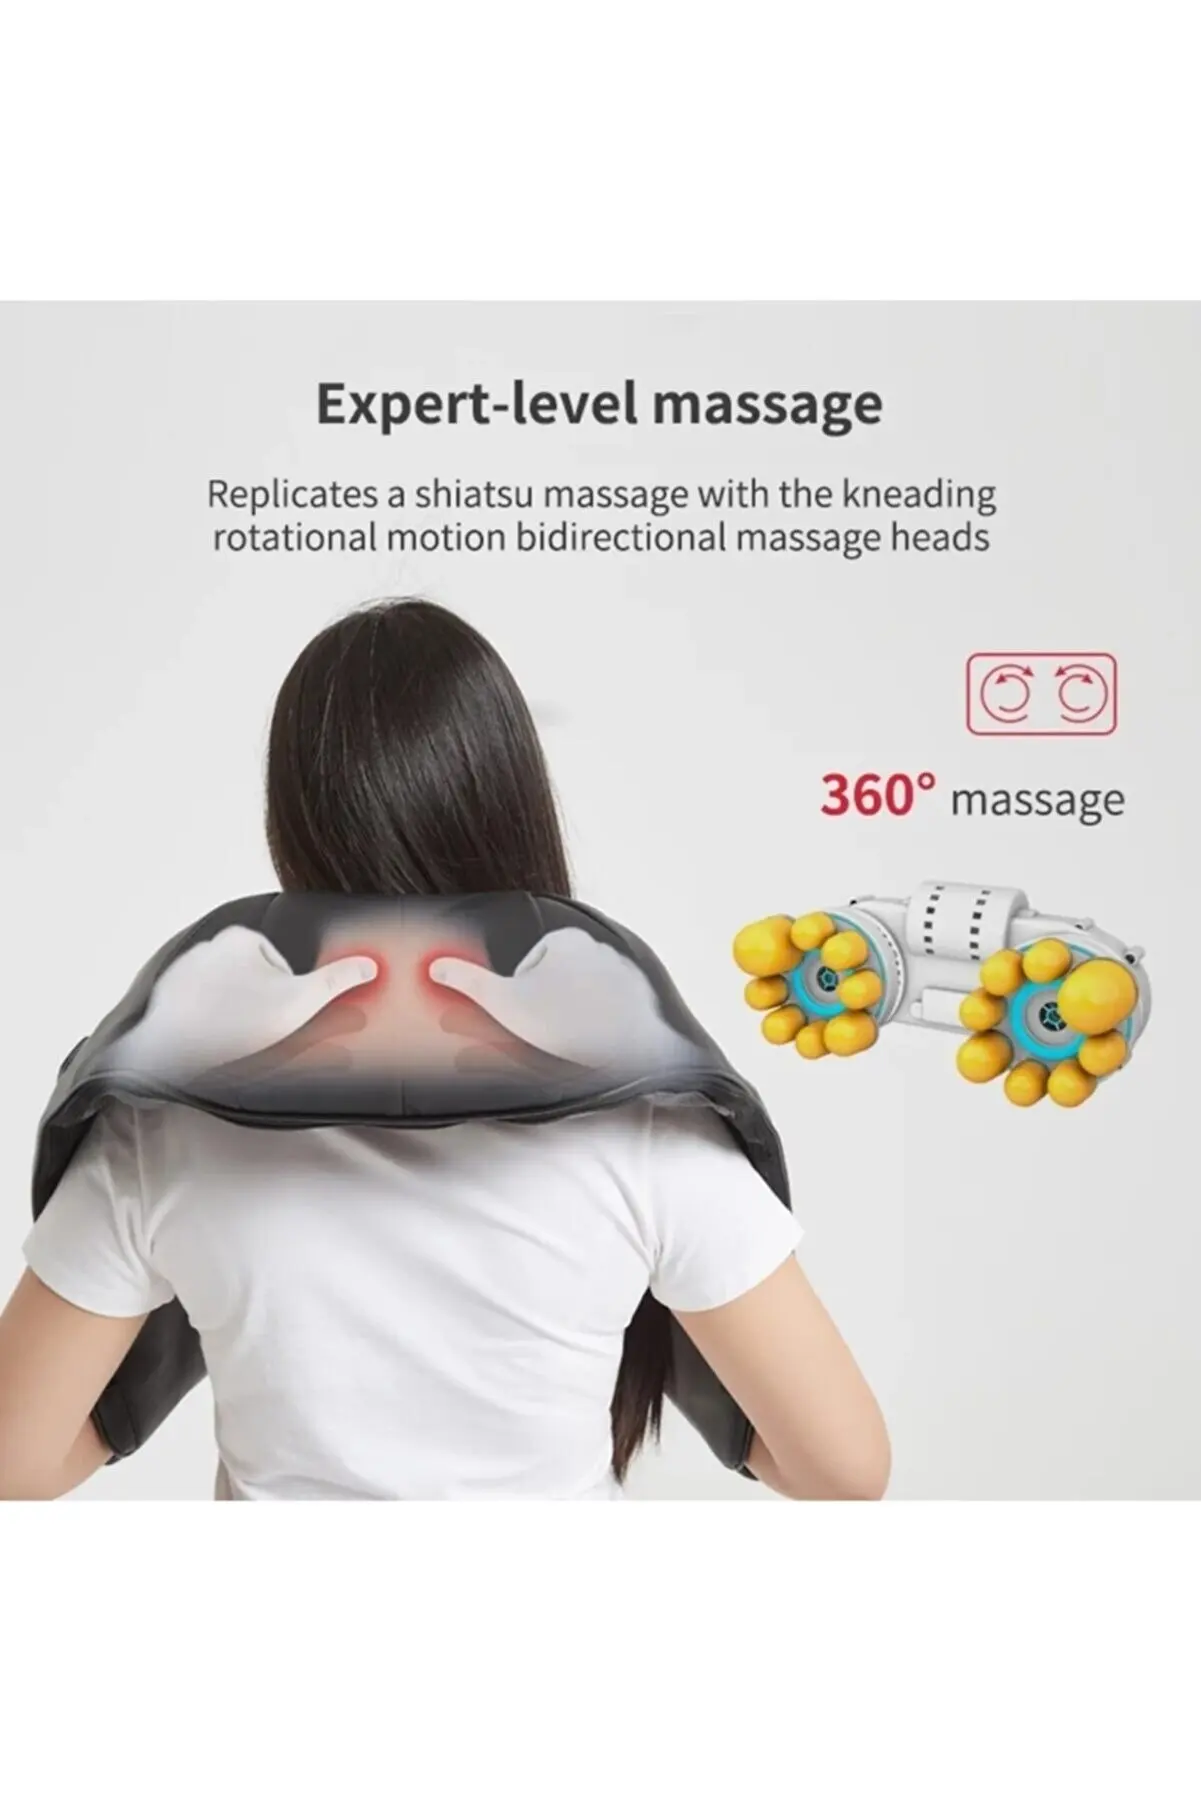 Heated Neck Waist Back Shoulder Massage Cushion Kneading With Scrub Massage Tool Home Office Car Easy To Use 3 Stage speed Adjus enlarge